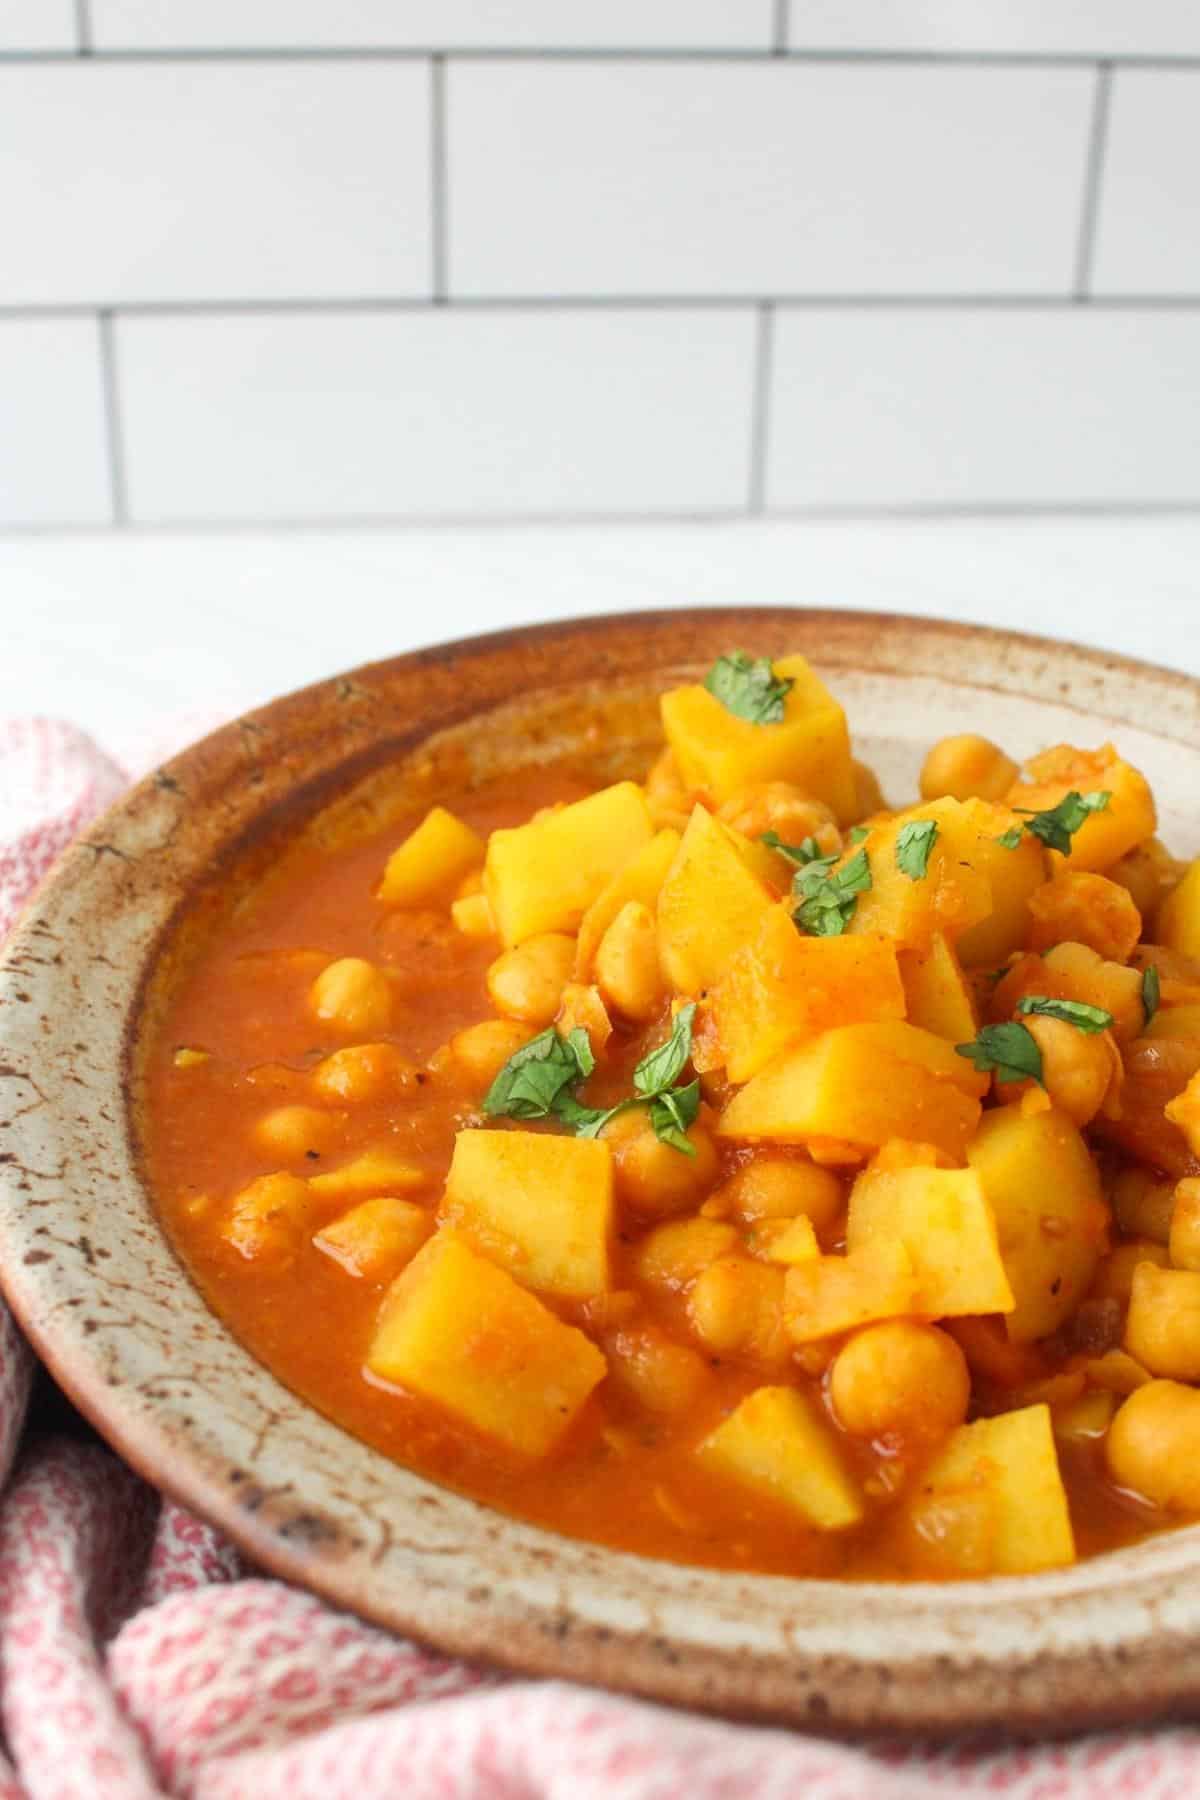 Chickpea and potato curry in a serving dish